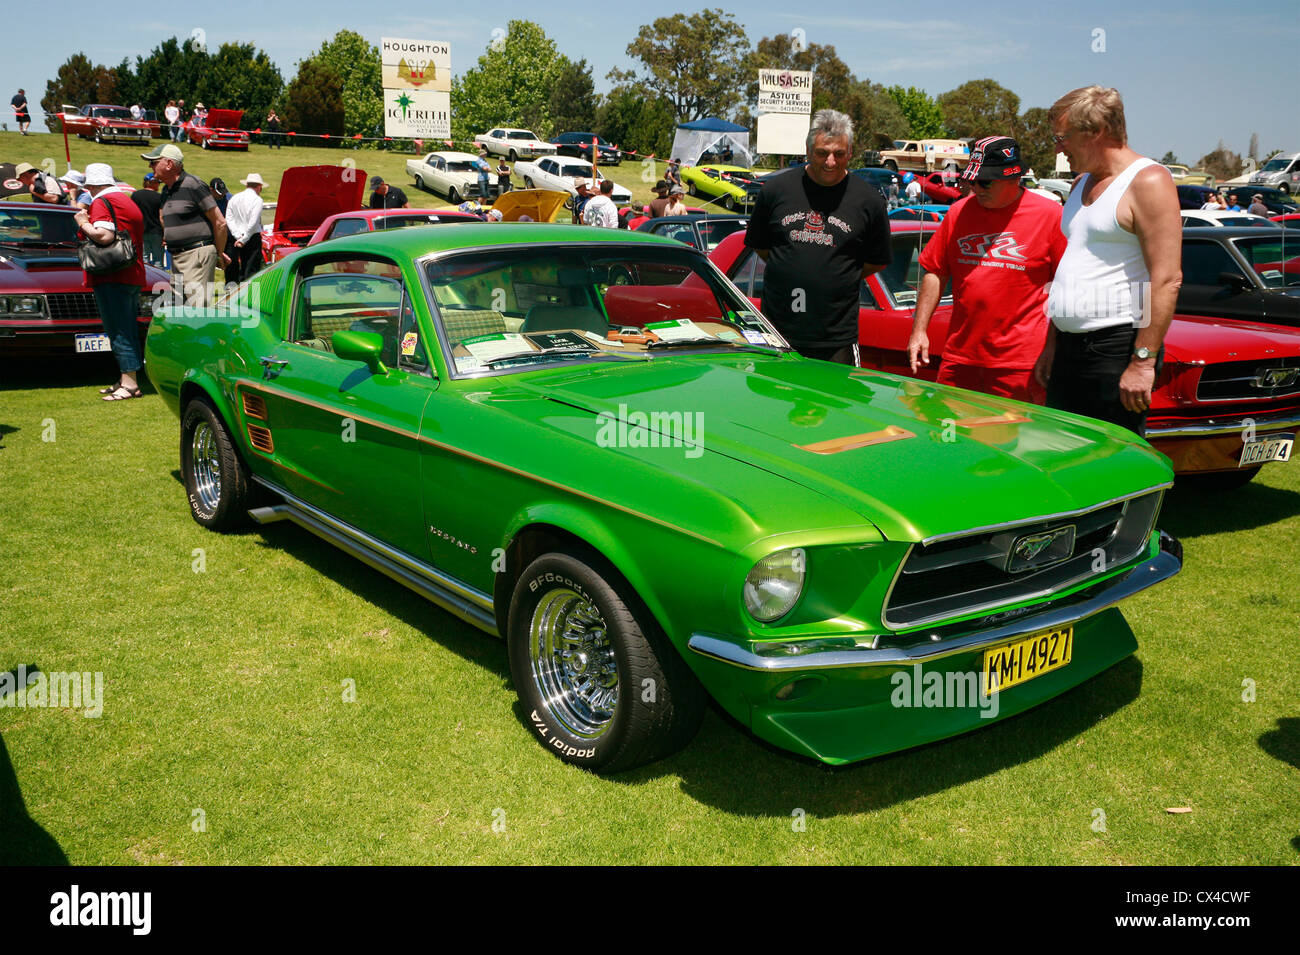 Car enthusiasts admiring a modified 1967 Ford Mustang Fastback at an outdoor Australian car show. Stock Photo